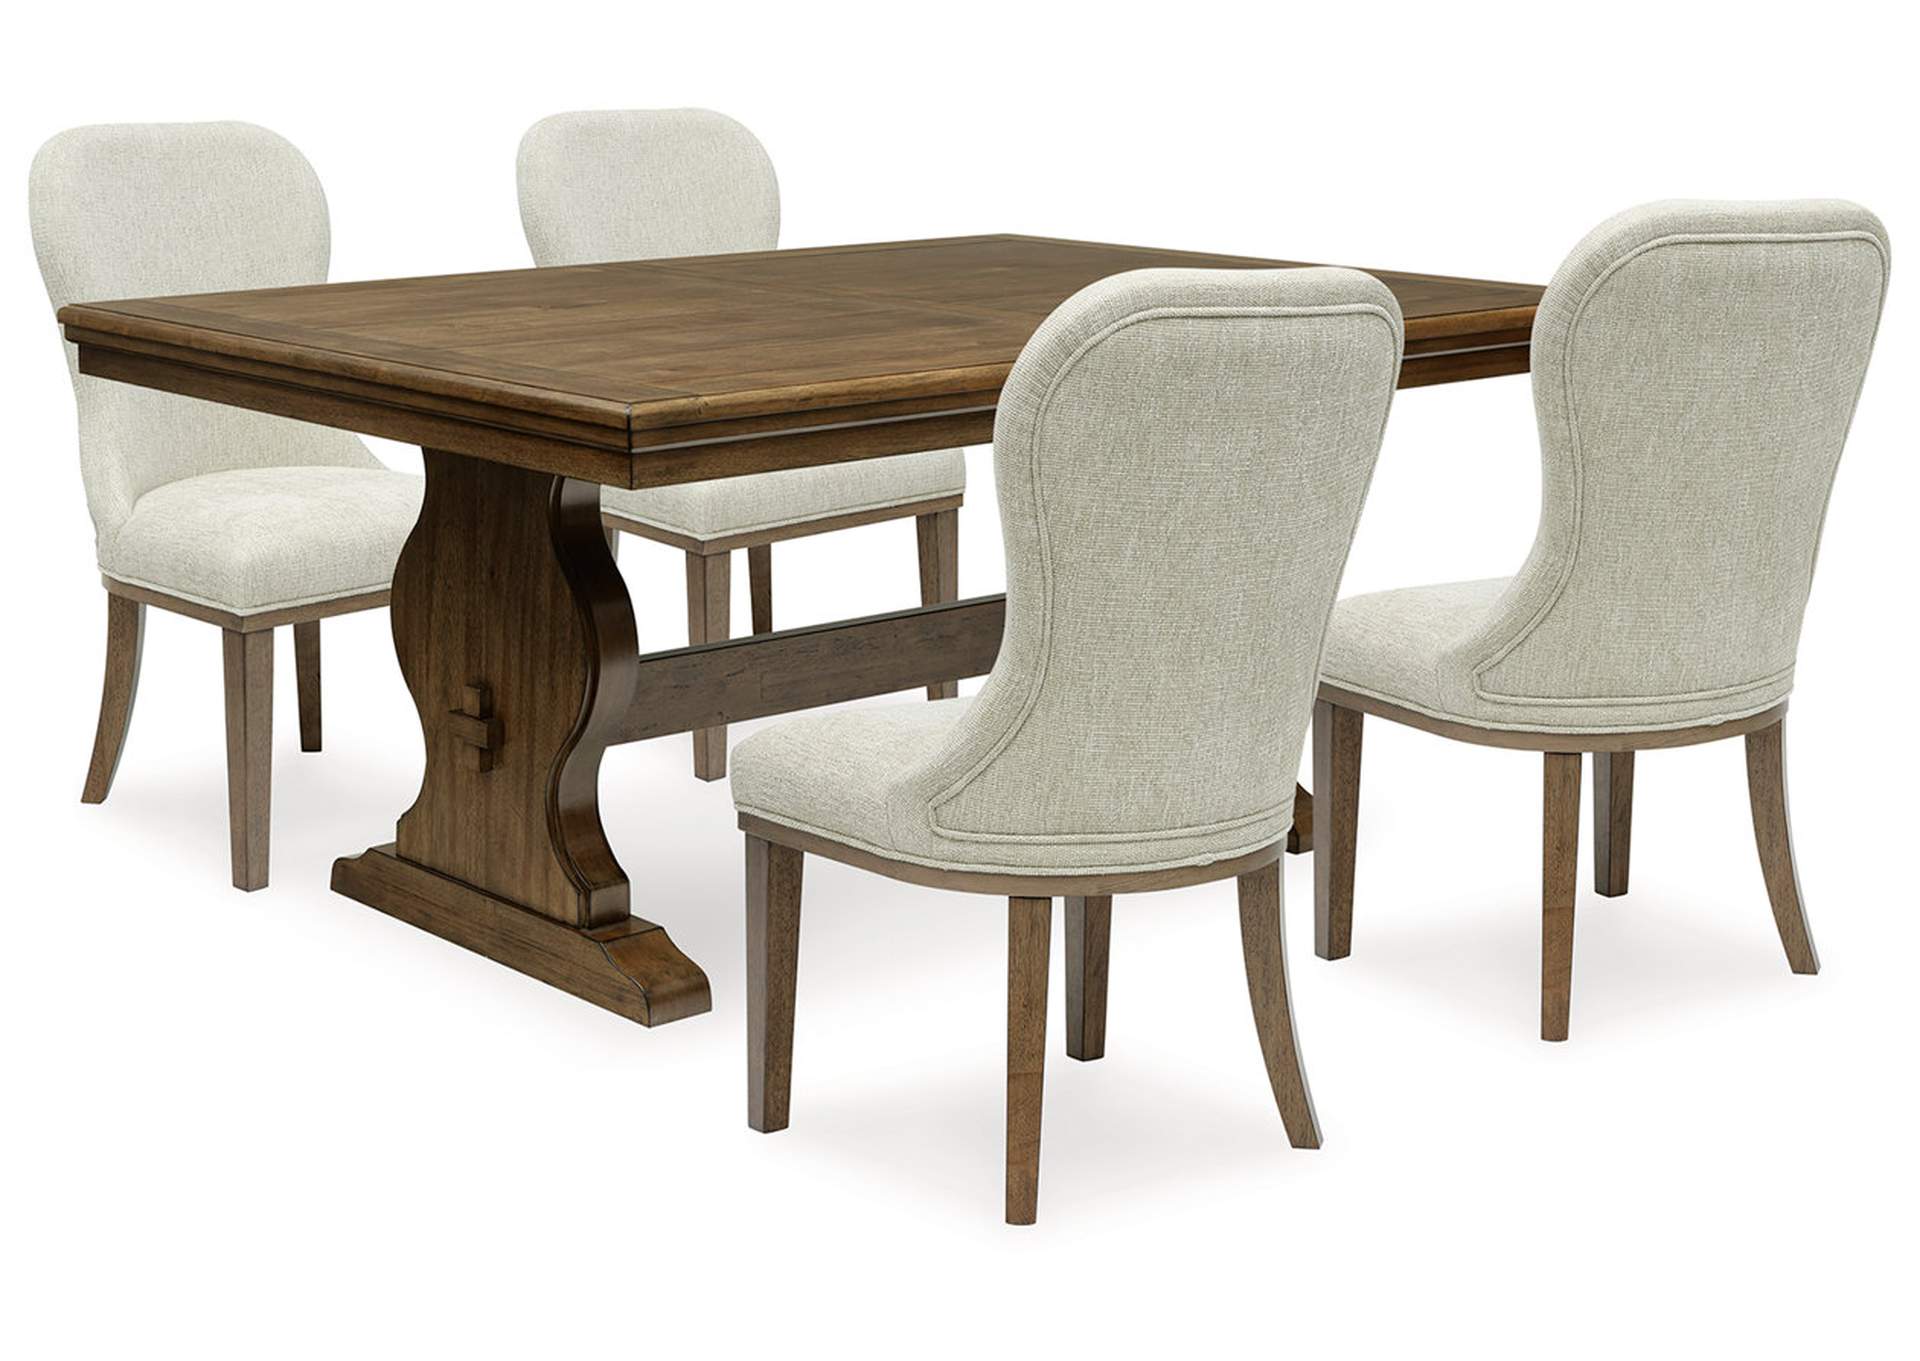 Sturlayne Dining Table and 4 Chairs,Benchcraft